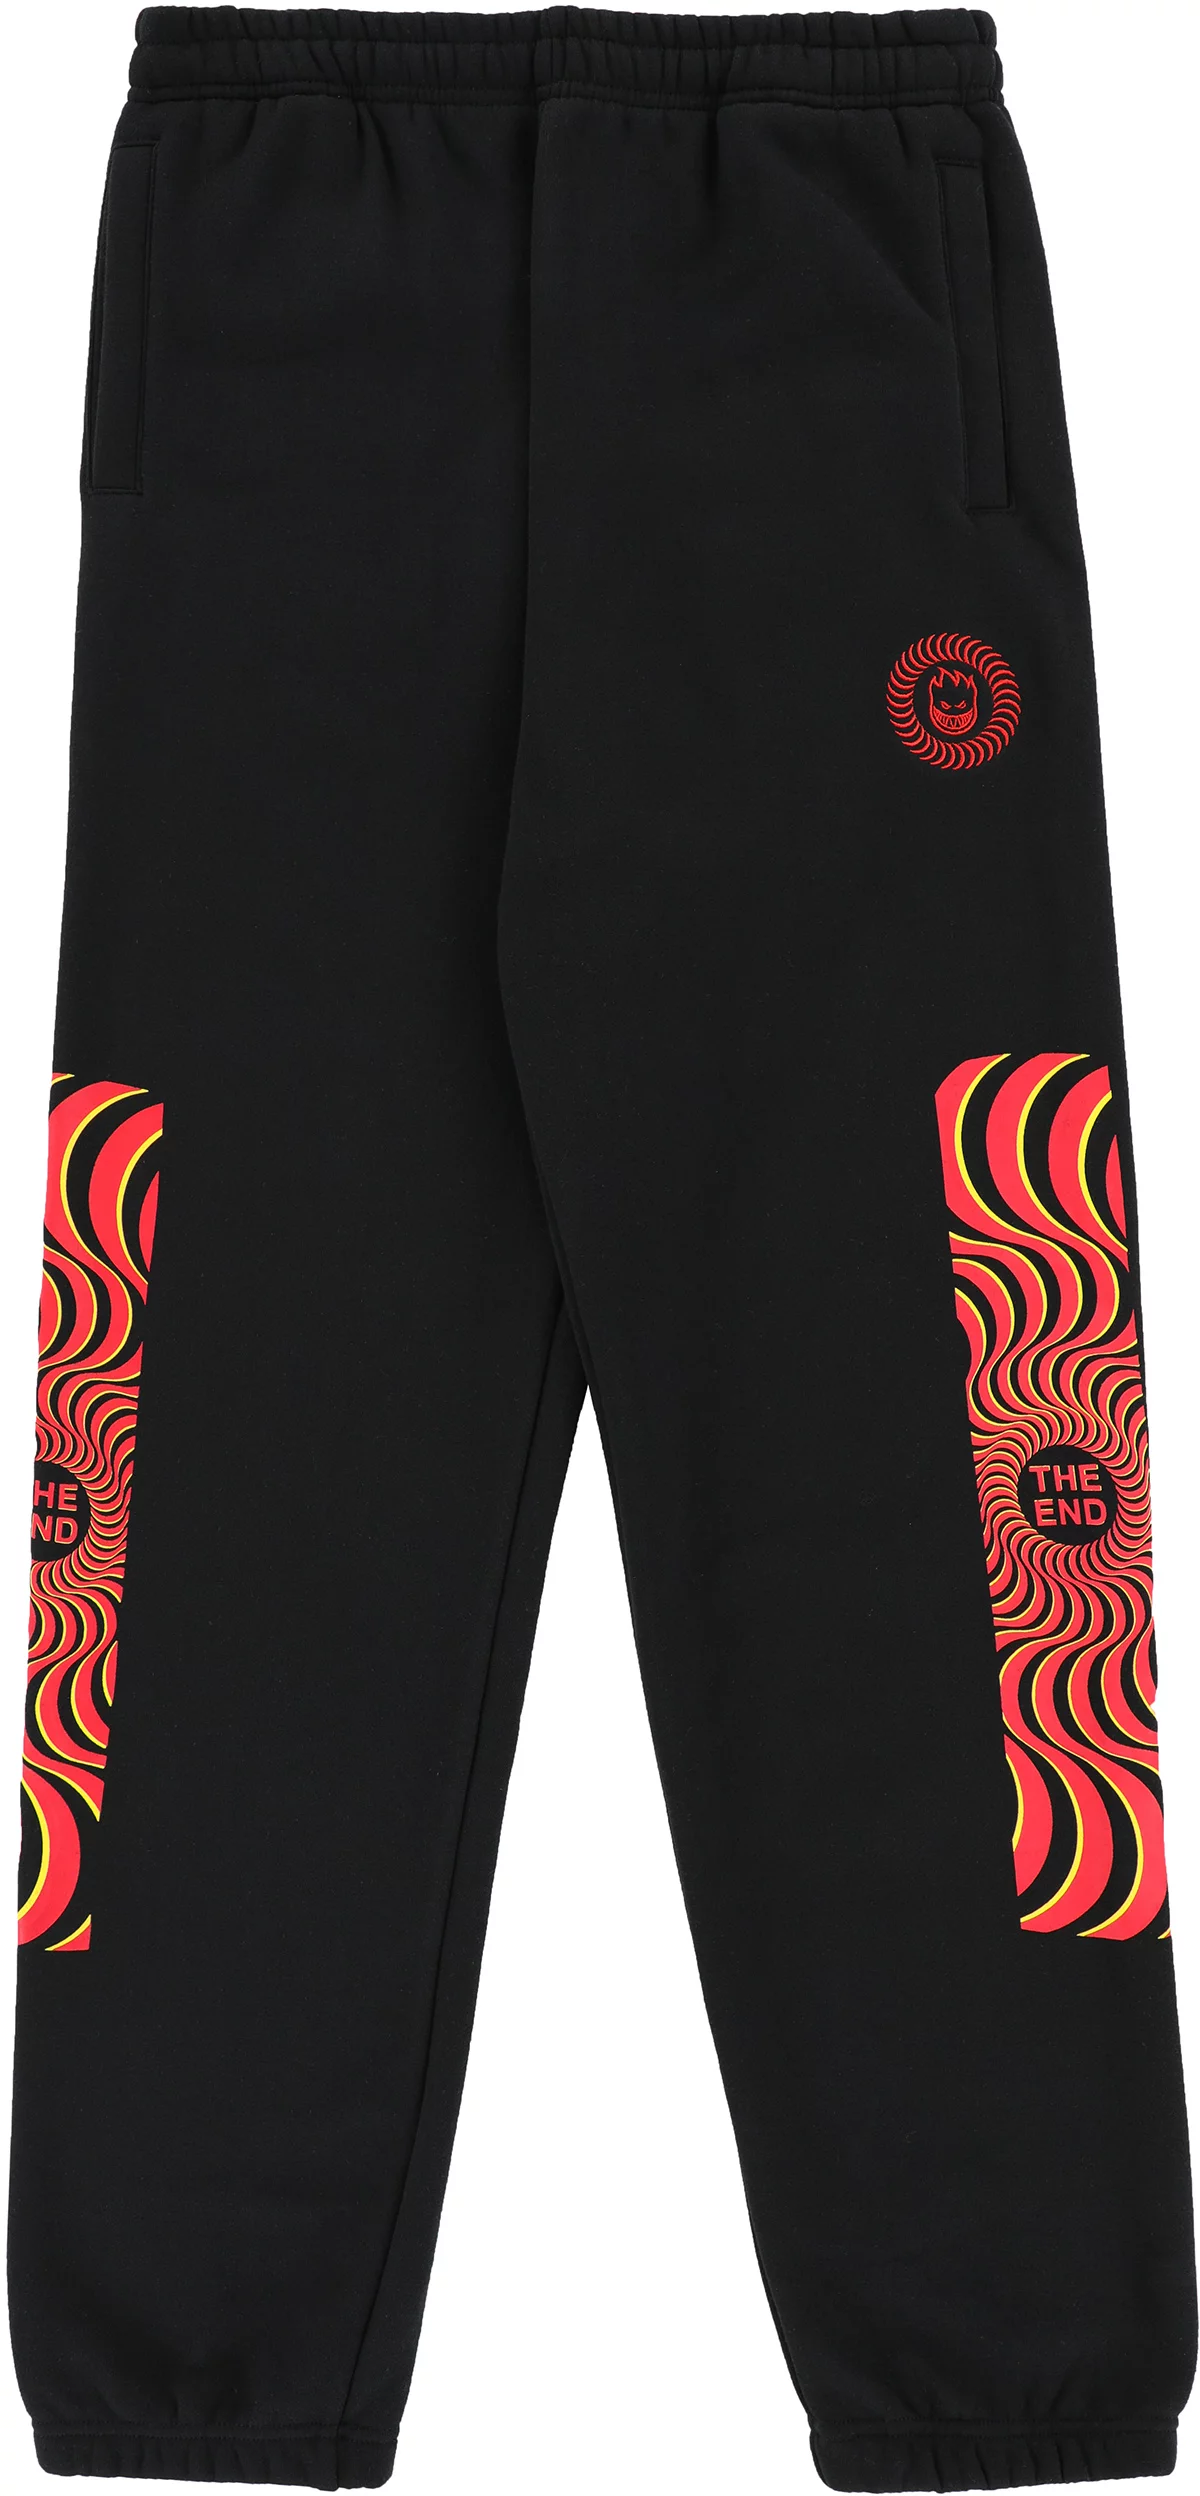 Spitfire Classic Swirl Overlay Sweat Pants - Black/Red Red/Yellow